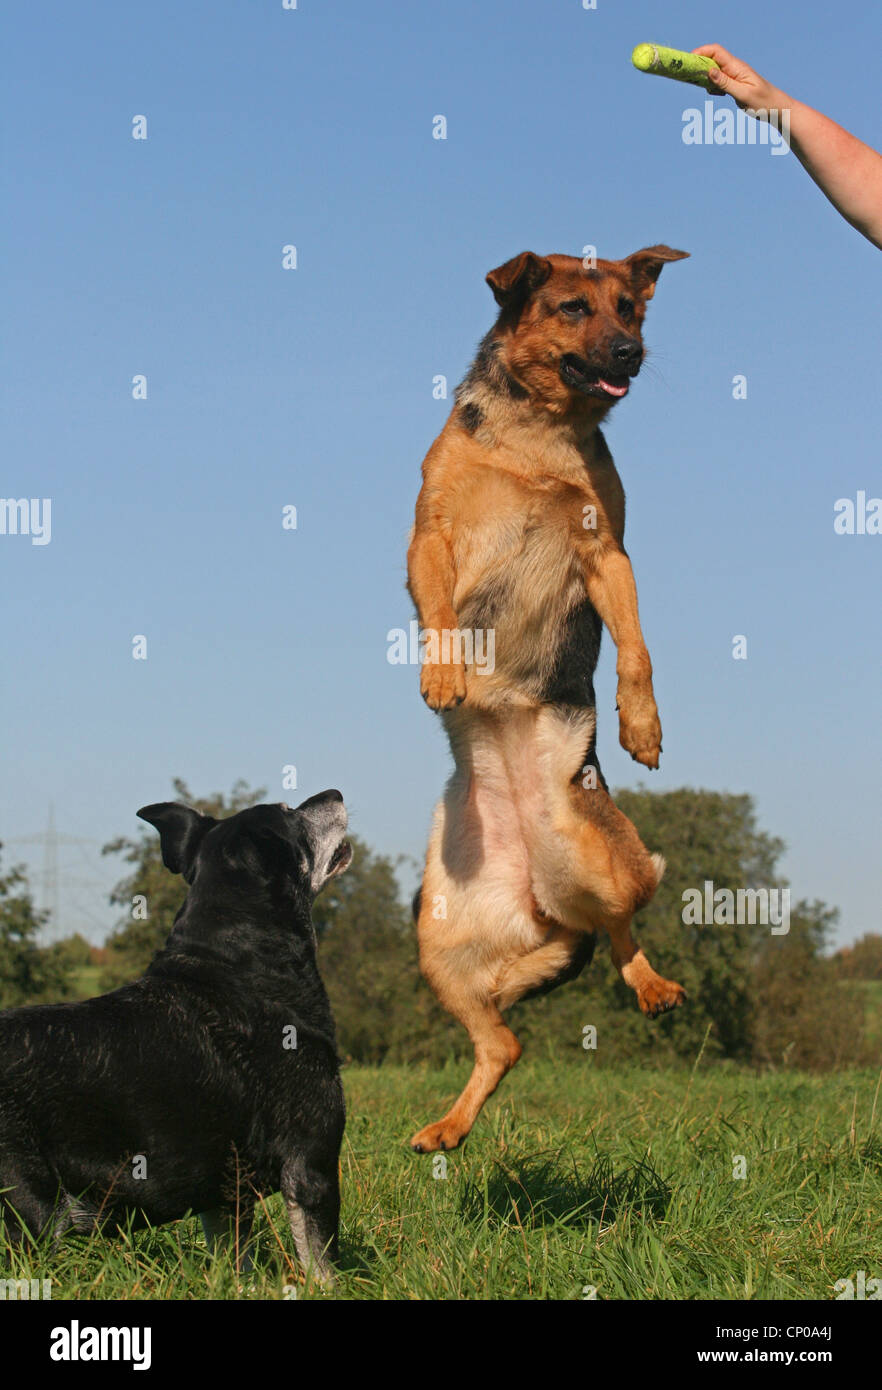 German Shepherd Dog (Canis lupus f. familiaris), jumping up to a toy, elderly mixed breed dog looking on Stock Photo